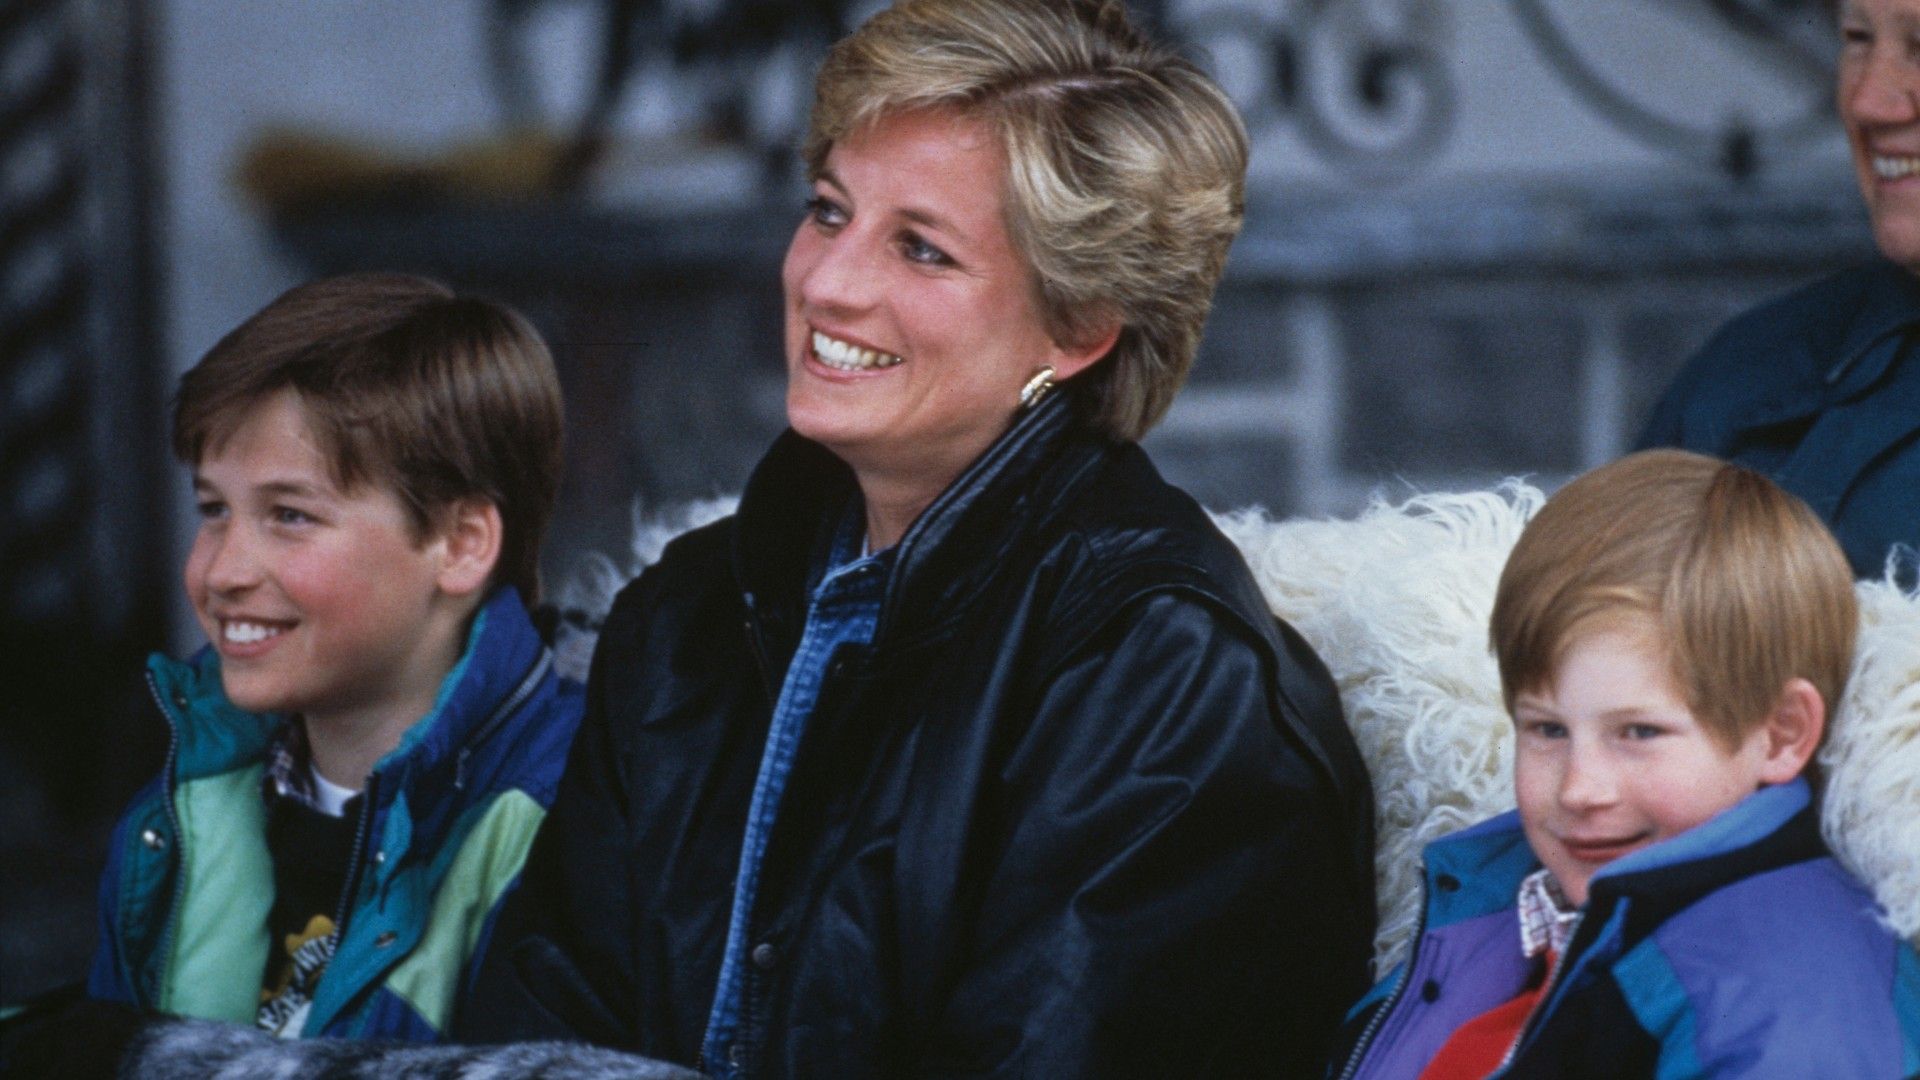 <p>                     Back in 1997, just months before she passed away, Diana auctioned off 79 of her royal dresses and ball gowns, to raise money for AIDS and cancer charities. And it’s reported that one of her sons encouraged her to do so.                   </p>                                      <p>                     Speaking in a Channel 5 documentary, Diana’s friend Debbie Frank claimed, "The idea of auctioning the dresses came from William. She told me so herself and she was so proud of him for coming up with that idea."                   </p>                                      <p>                     In a rare interview with <a href="https://archive.vanityfair.com/article/share/0ff0bfd3-7d8d-4dfc-8b6d-37467ad4ab17"><em>Vanity Fair</em></a> at the time<em>,</em> Diana confessed, "Yes, of course it is a wrench to let go of these beautiful dresses. However, I am extremely happy that others can now share the joy that I had wearing them."                   </p>                                      <p>                     It’s reported that the auction raised almost £4 million. And while Diana was keen to raise funds for causes she was passionate about, the auction of her royal wardrobe was also said to be a way for her to move beyond her royal life, following her divorce.                   </p>